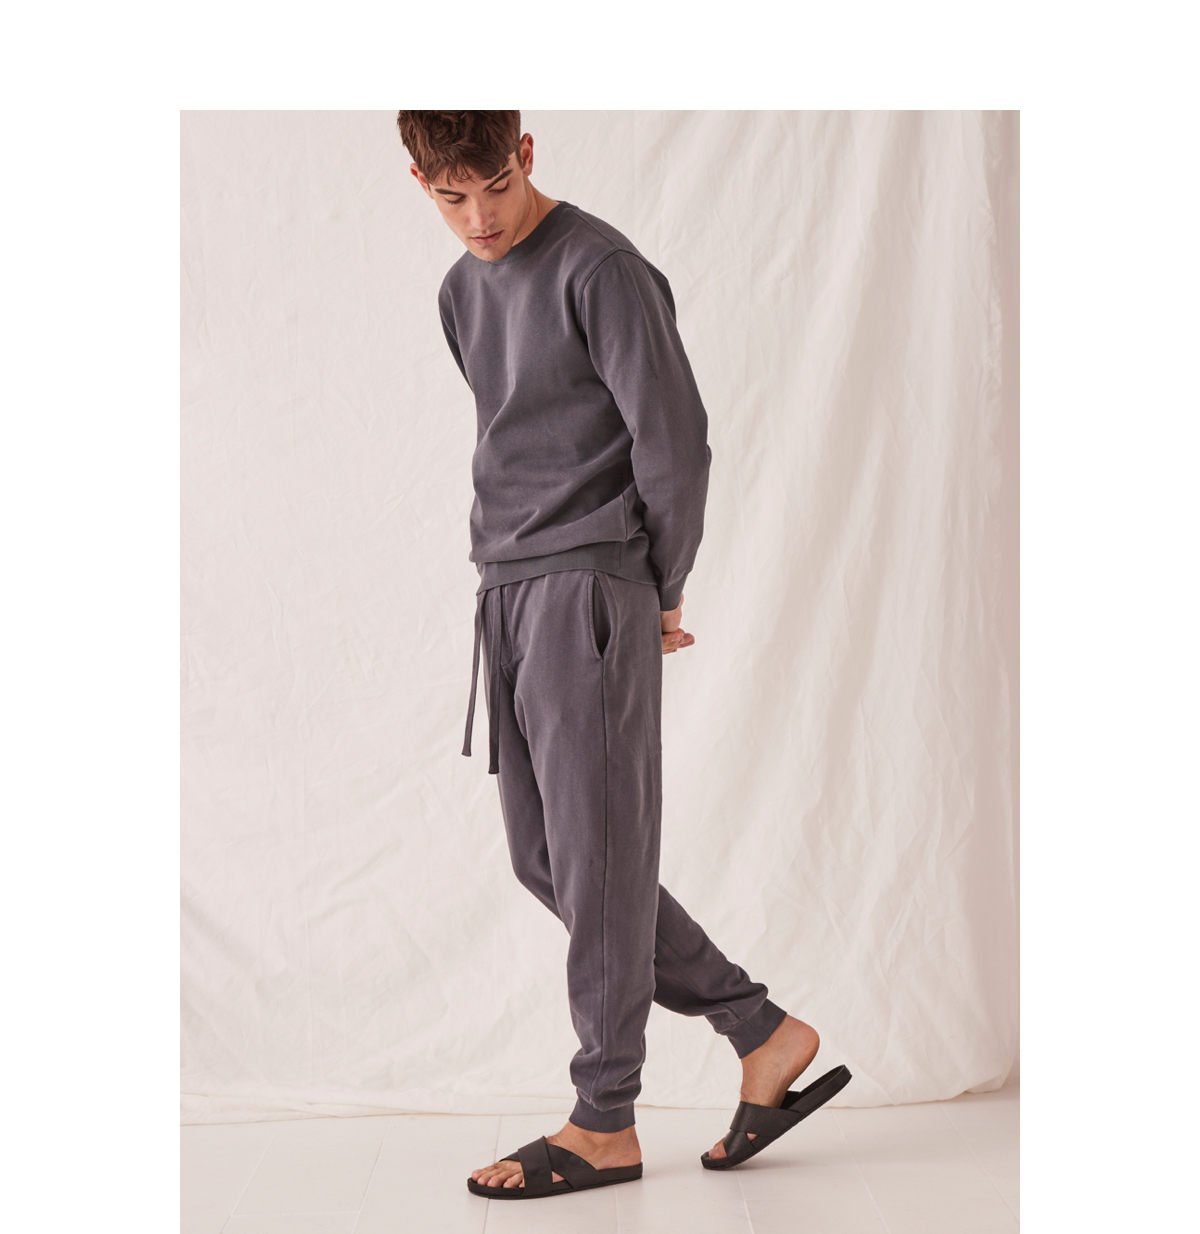 Reeve Lounge Pant Charcoal | Assembly Label